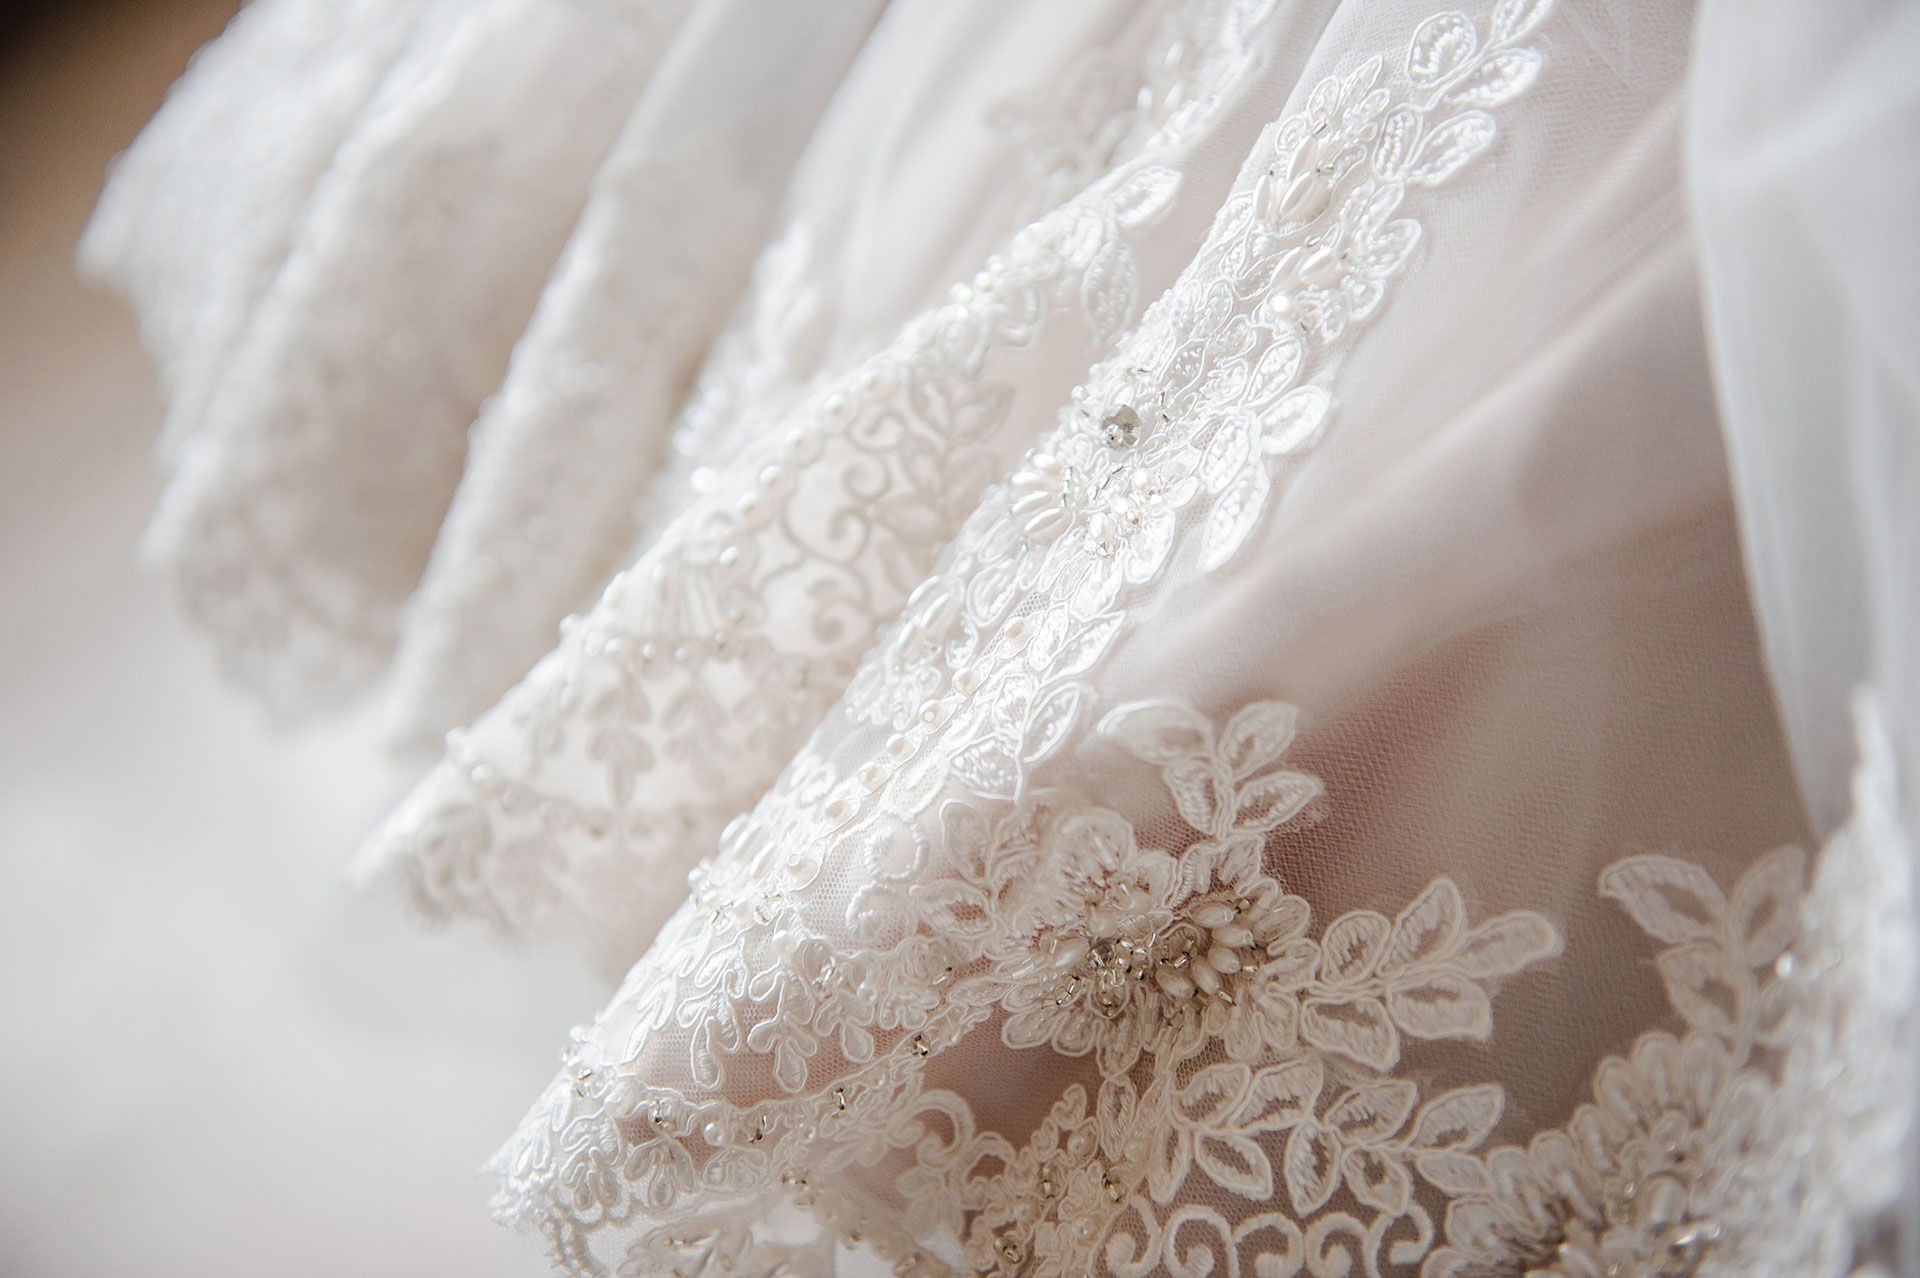 Embroidery on the dress made by wedding dress designer